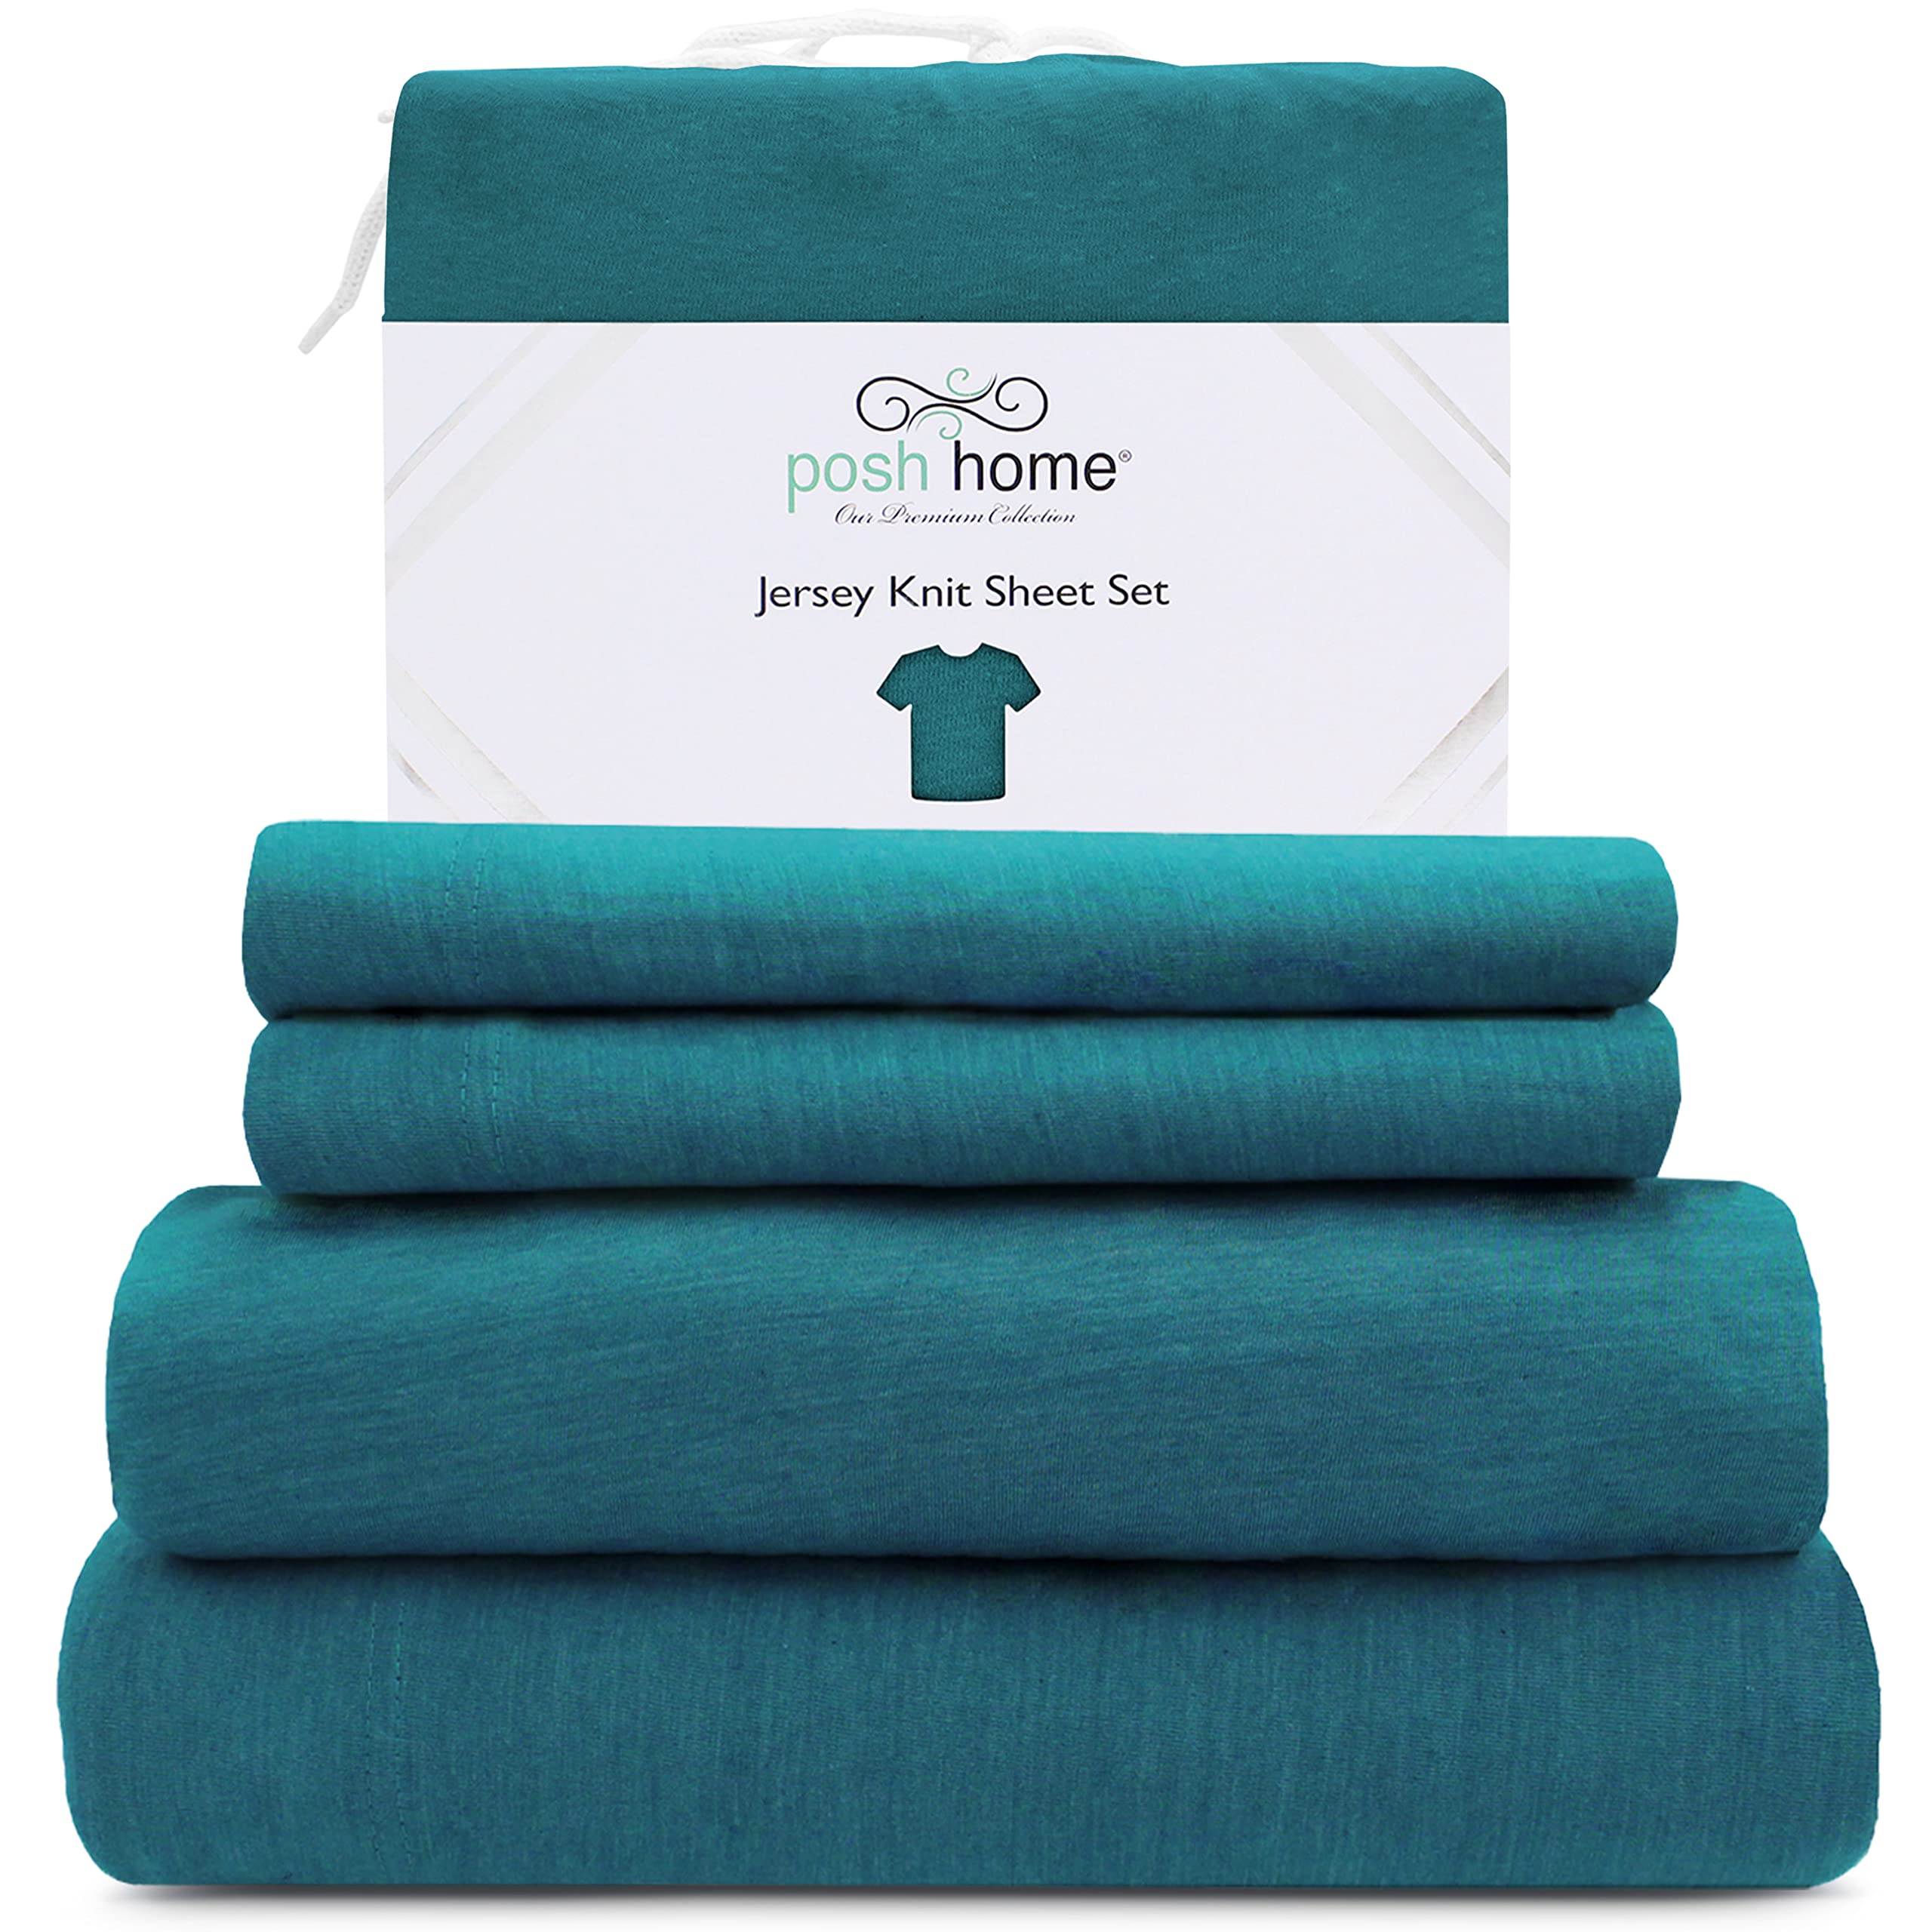 Posh Home Jersey Knit Sheet Set - 4-Piece Jersey Bed Sheets - T-Shirt Breathable & Soft cotton Jersey Sheets - Includes Flat She